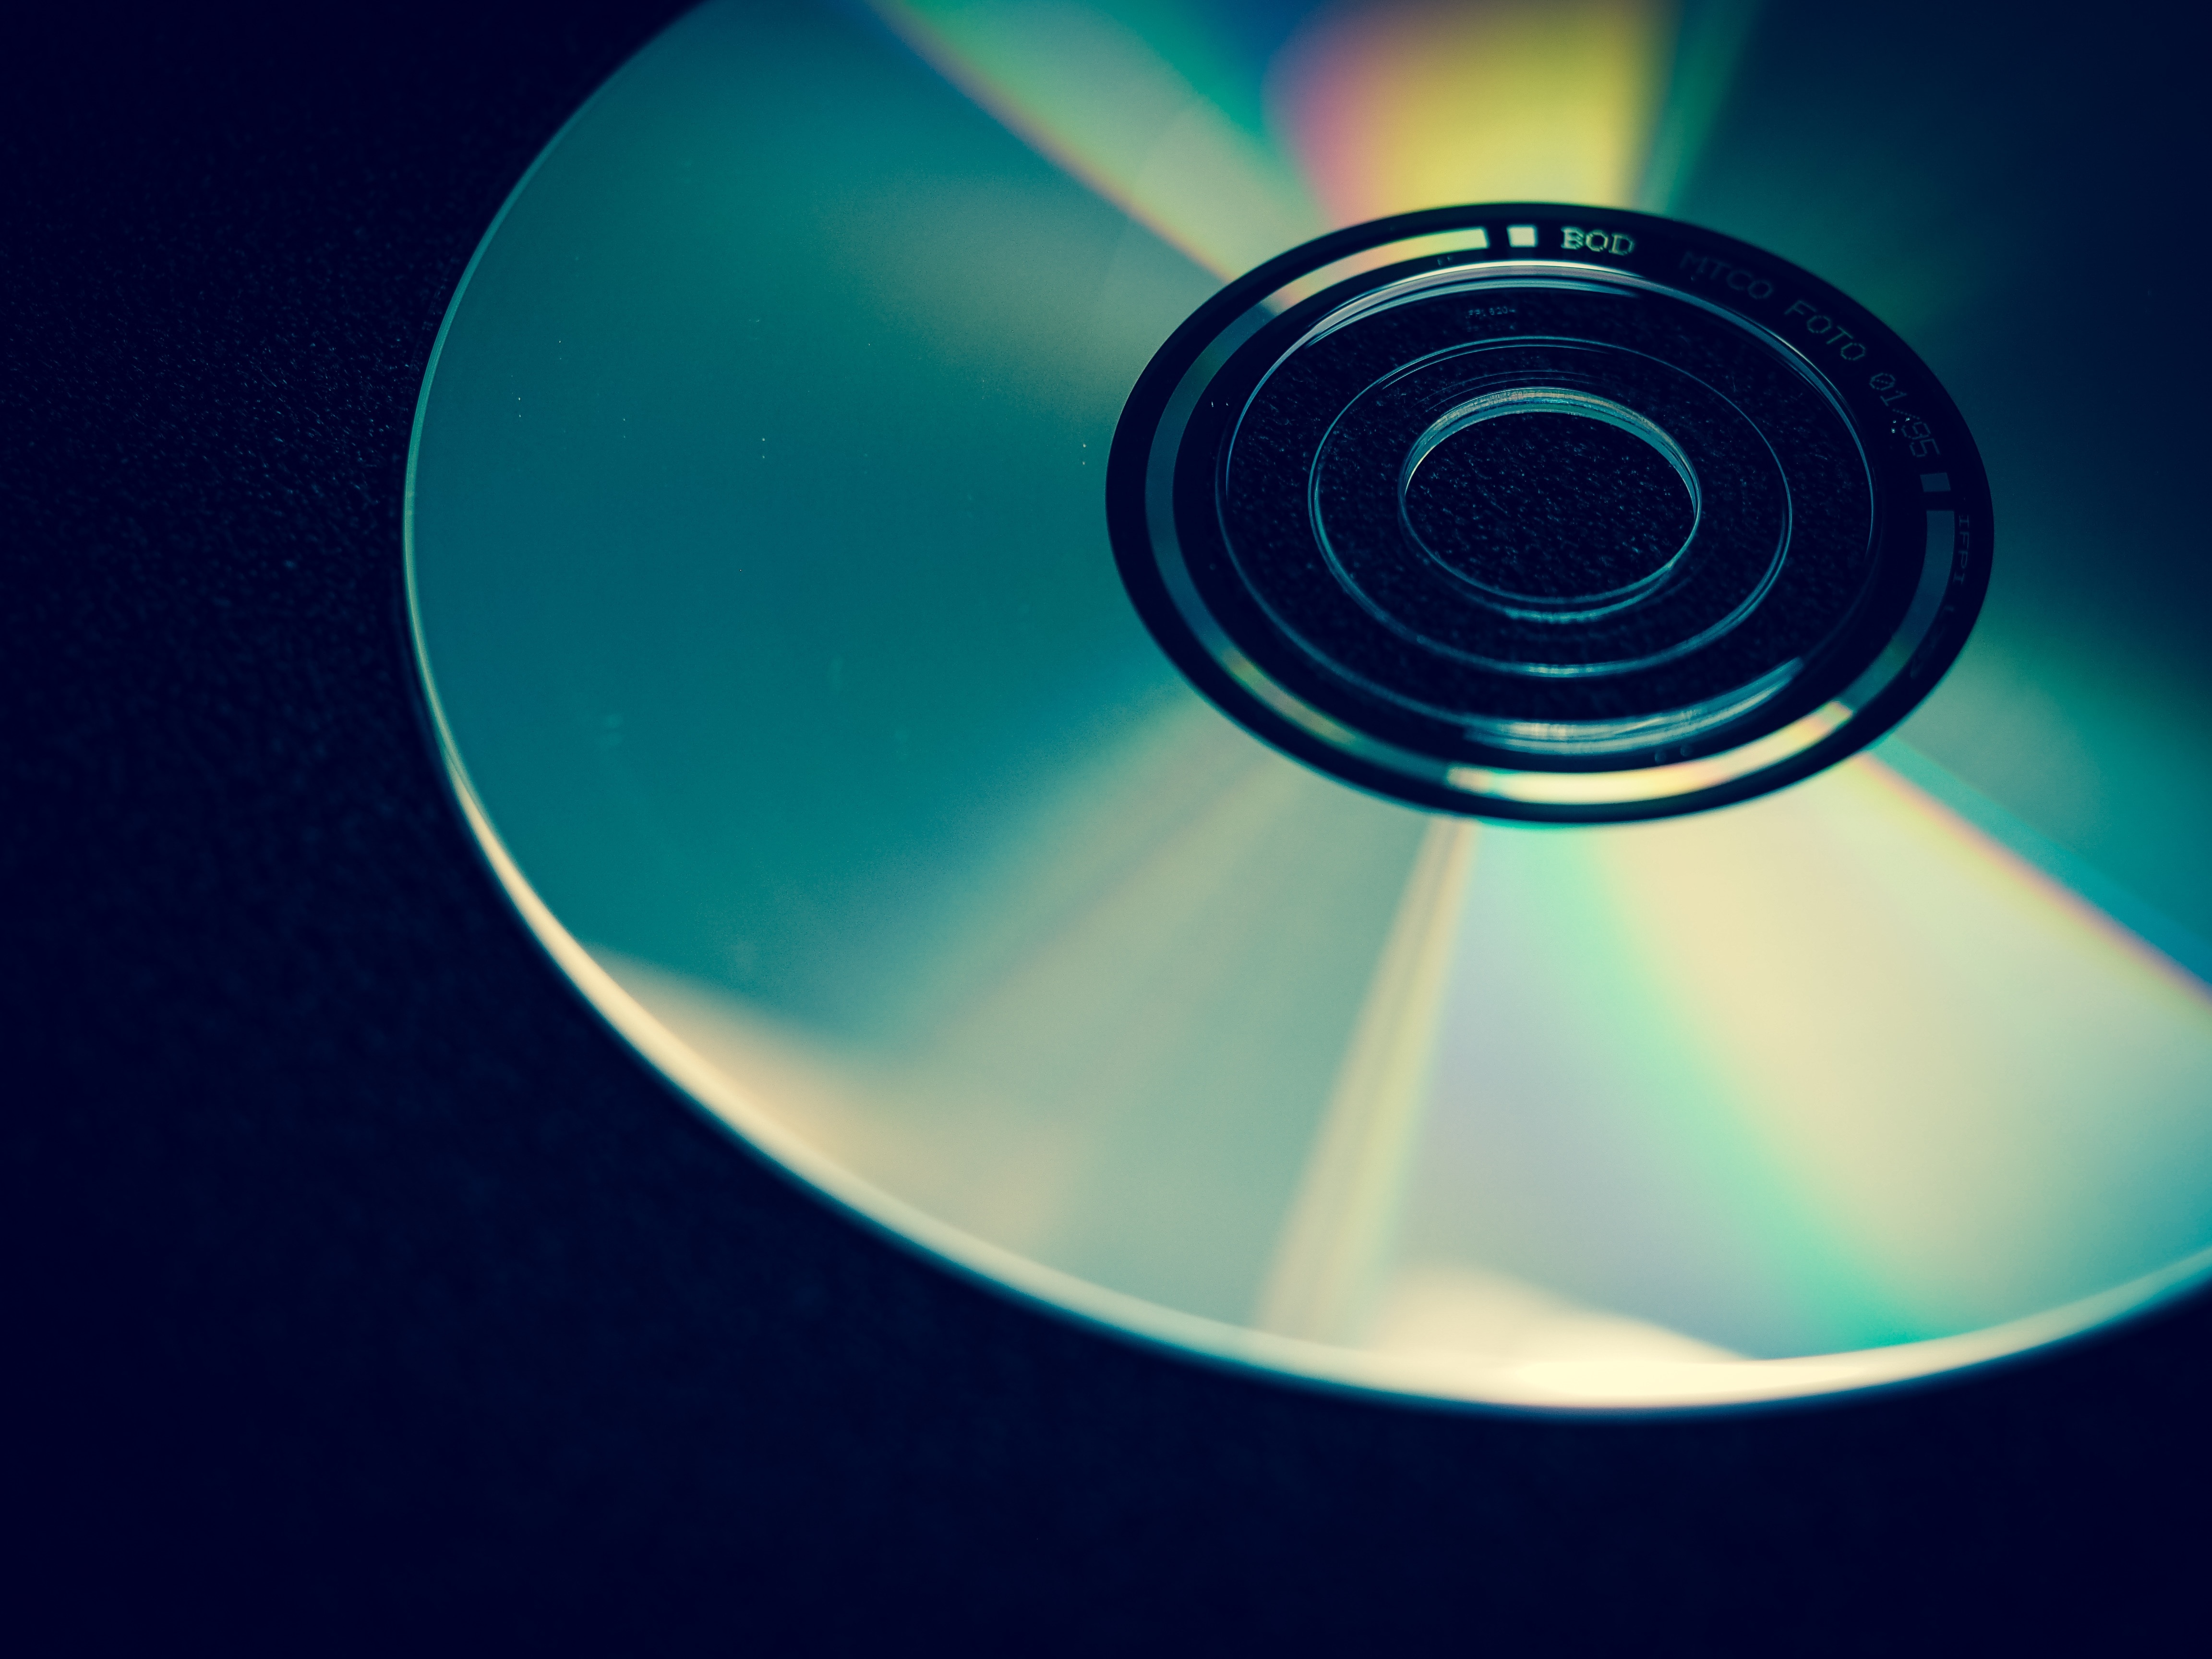 Compact Disc With Black Background Free Image Peakpx HD Wallpapers Download Free Images Wallpaper [wallpaper981.blogspot.com]